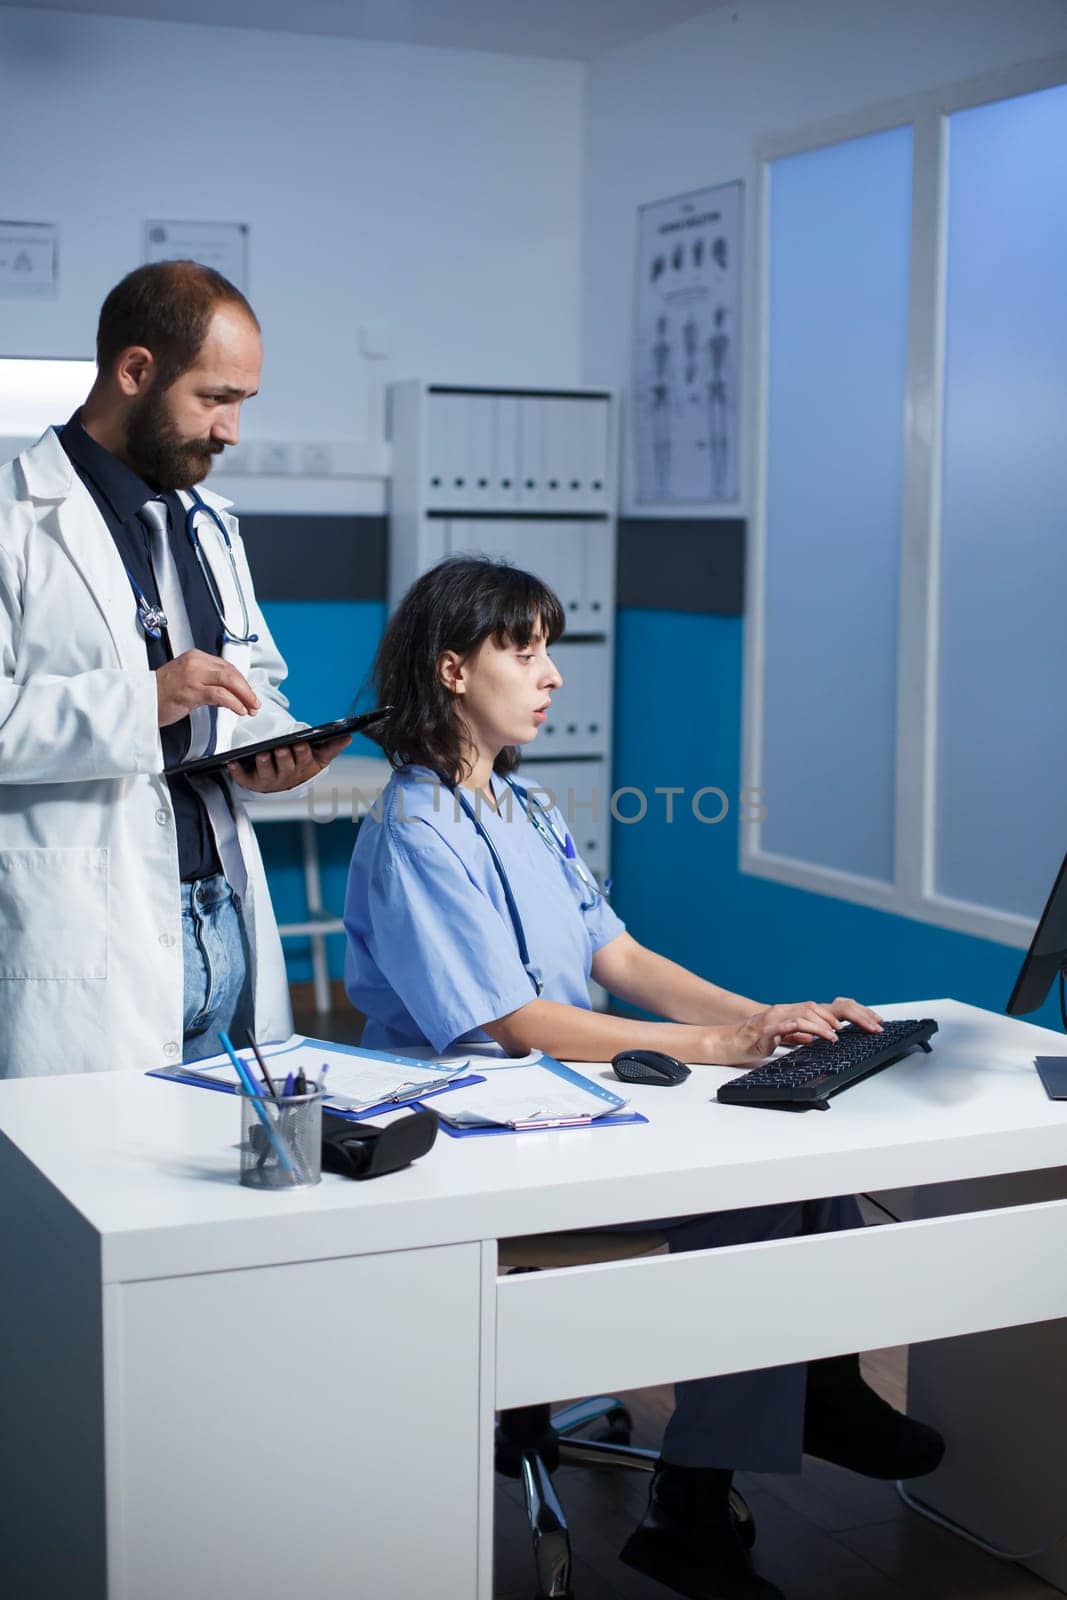 Caucasian doctor and female healthcare worker collaborating in a hospital office. They discuss medical cases, using digital devices for communication and showing images on a tablet.